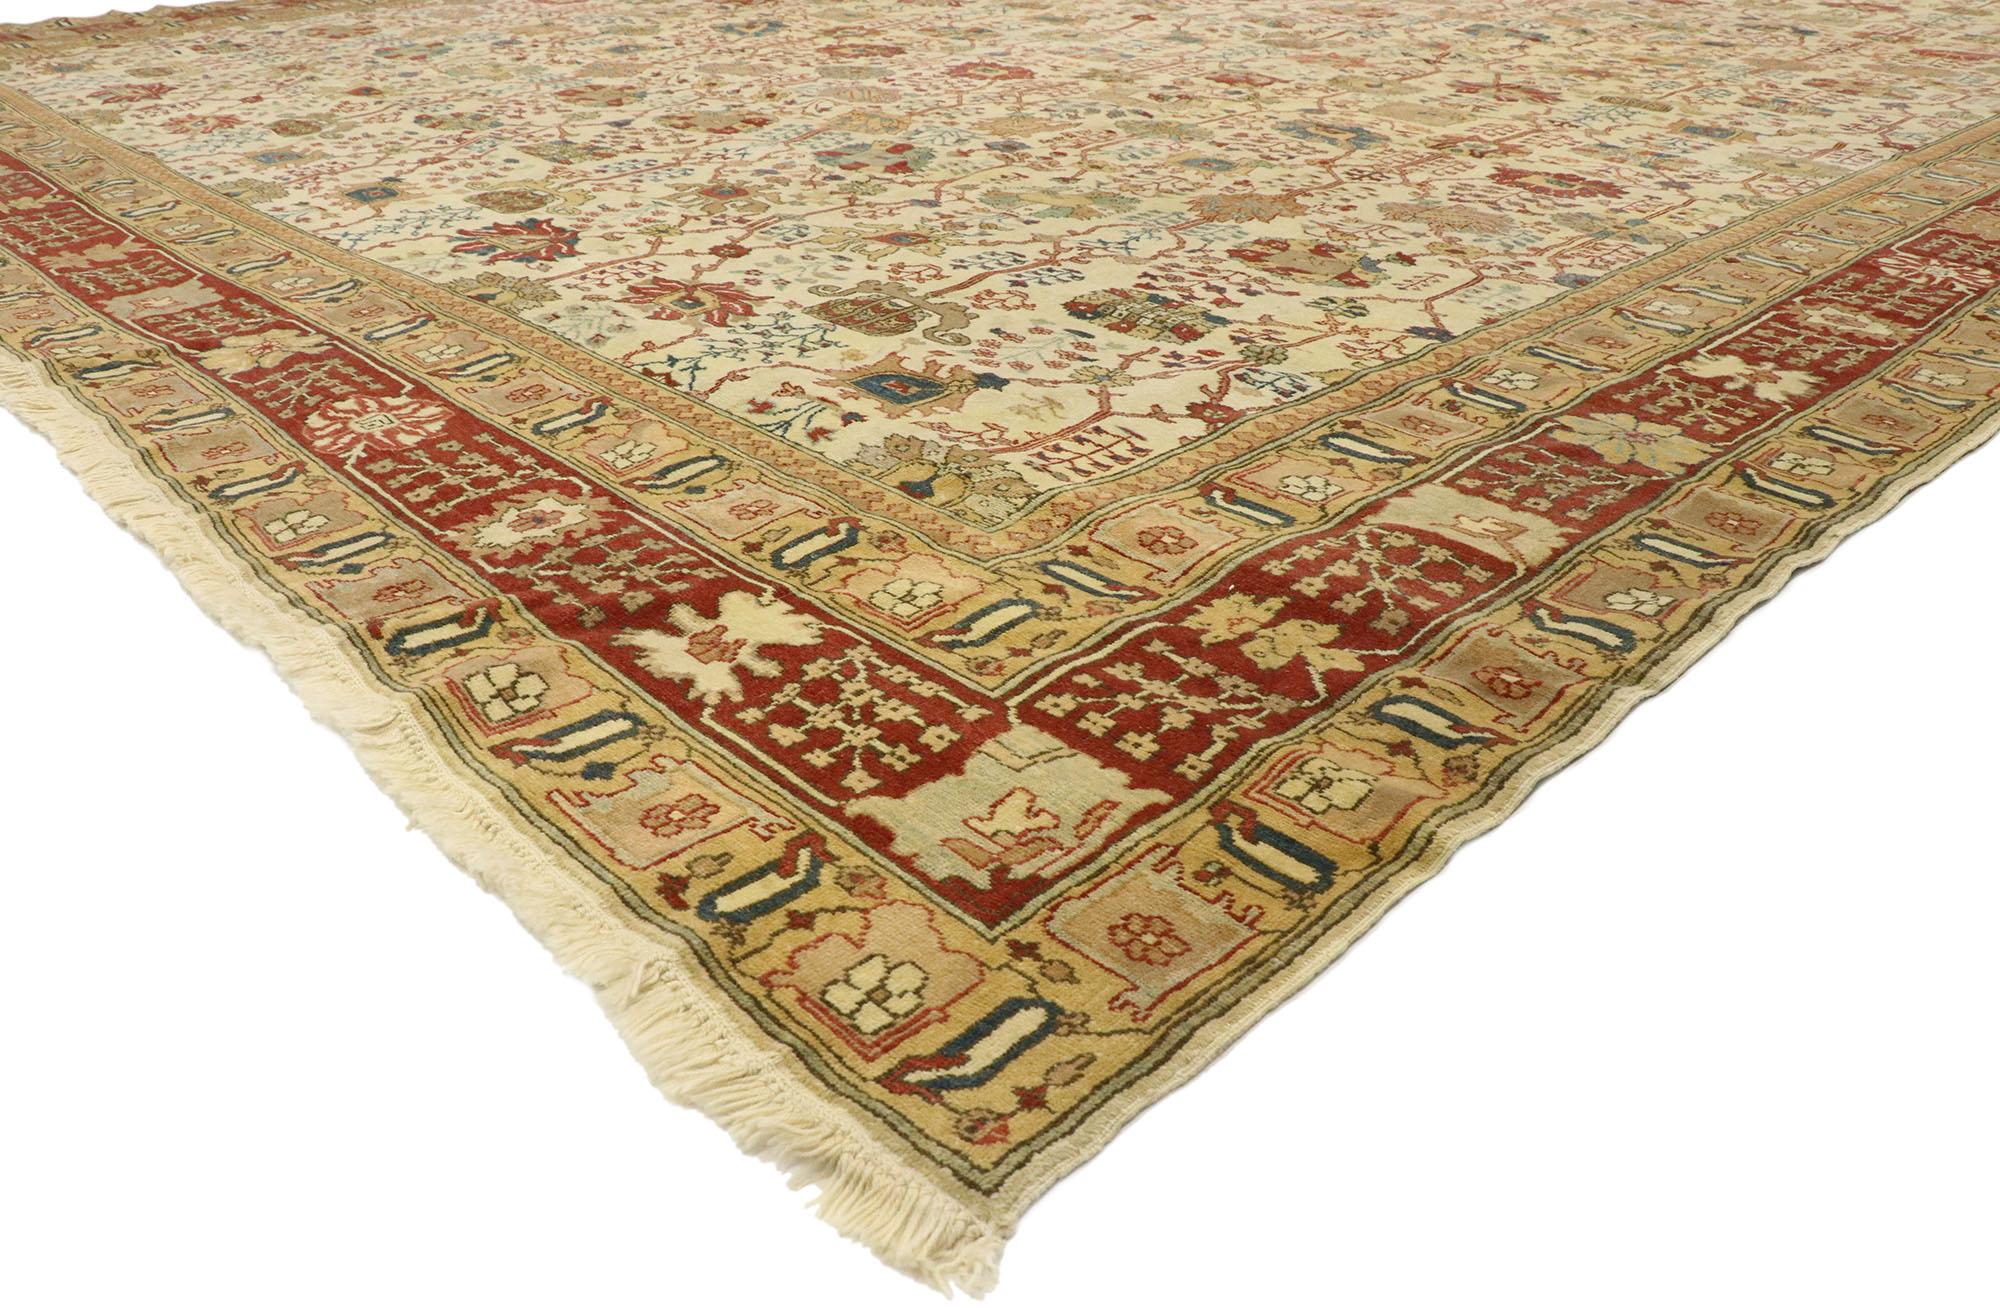 76887, vintage Turkish Rug with Arts & Crafts style inspired by William Morris. With its timeless design and architectural elements of naturalistic forms with an earthy color palette, this hand knotted wool vintage Turkish rug beautifully embodies